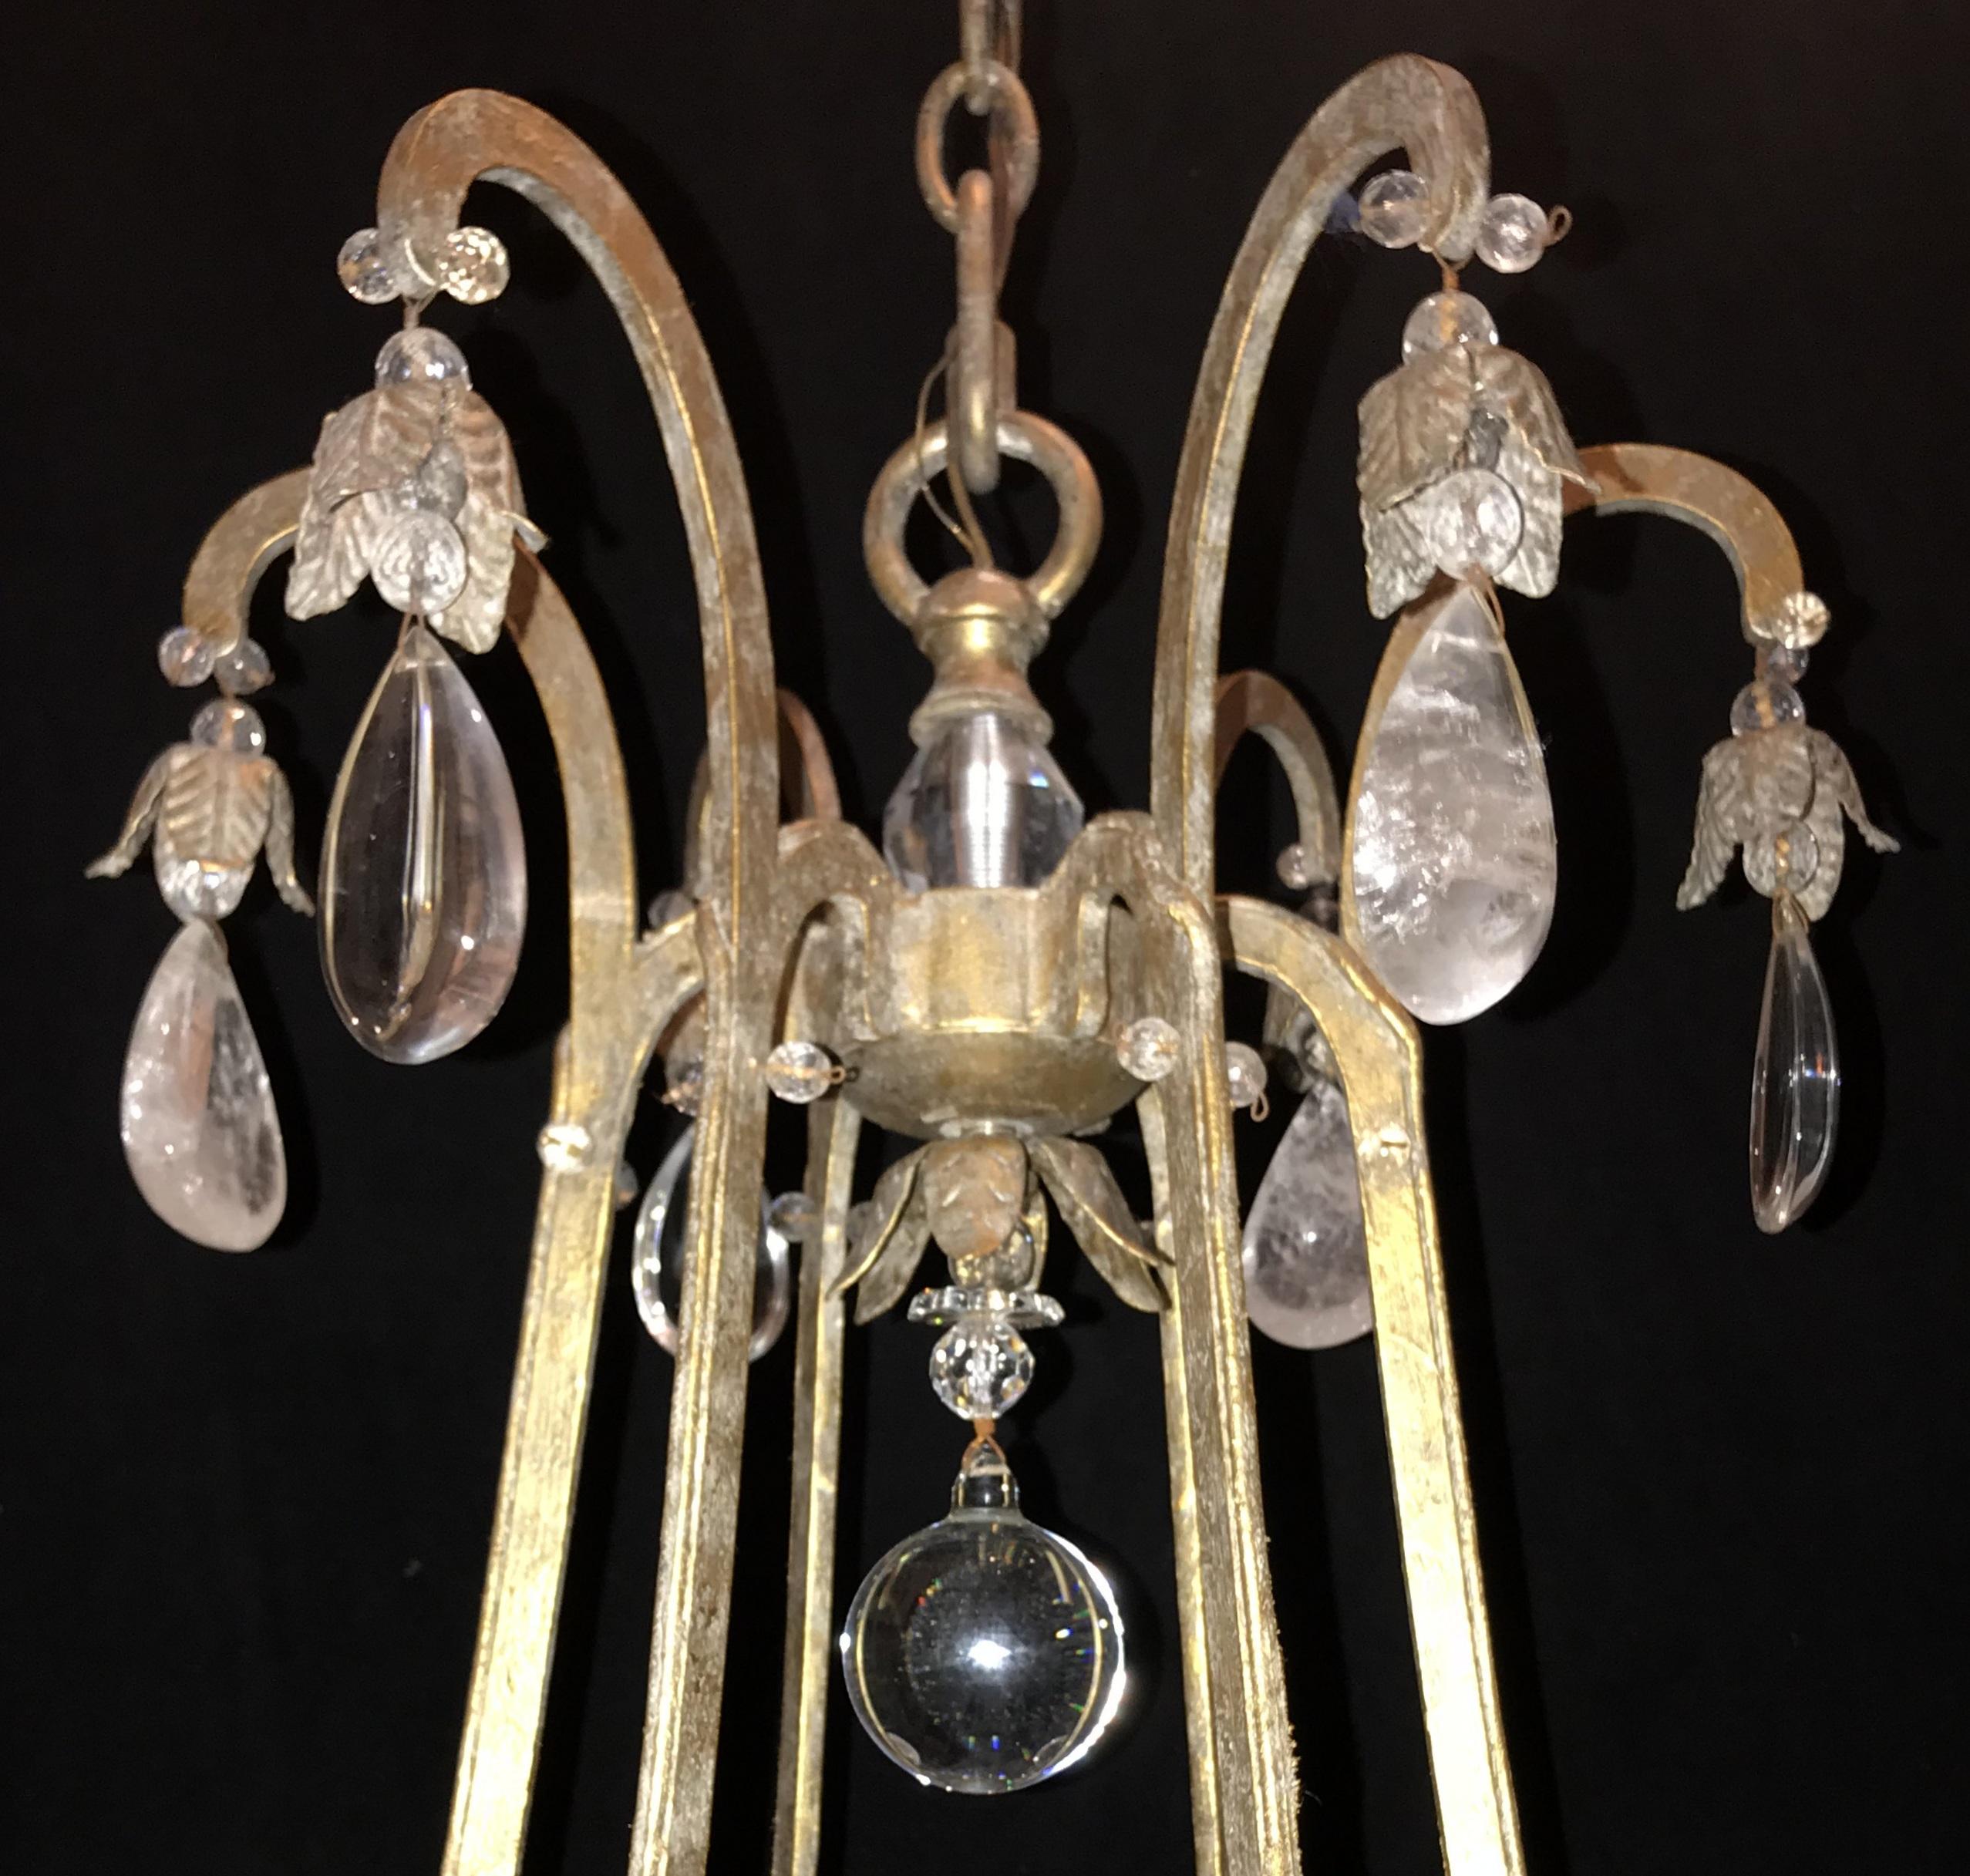 A wonderful Mid-Century Modern gold gilt Baguès / Jansen style rock crystal and bead flower chandelier, with a large centre finial and finished off with a rock crystal ball on the bottom.

Measures: 38” H x 32